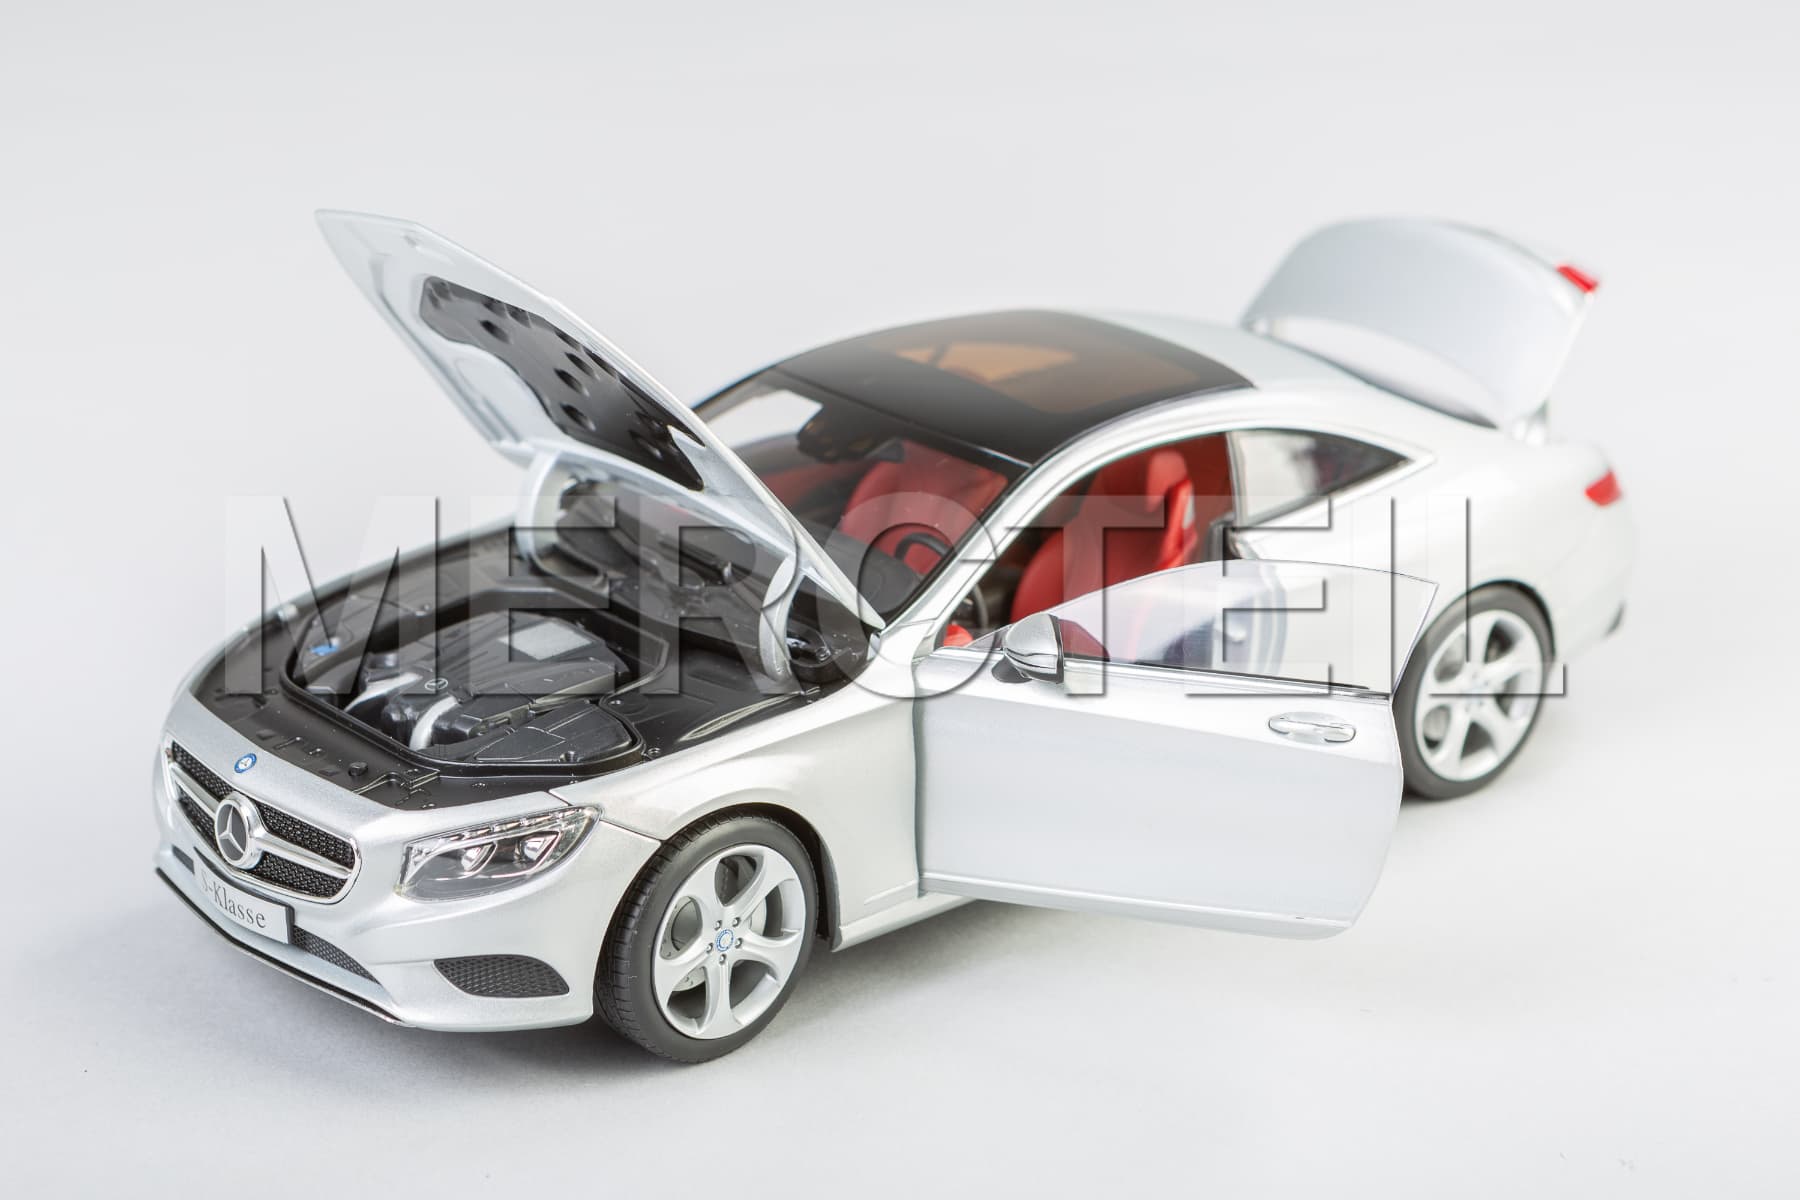 S-Class Coupe 1:18 Model Car 217 Genuine Mercedes-Benz Collection (Part number: B66961242)